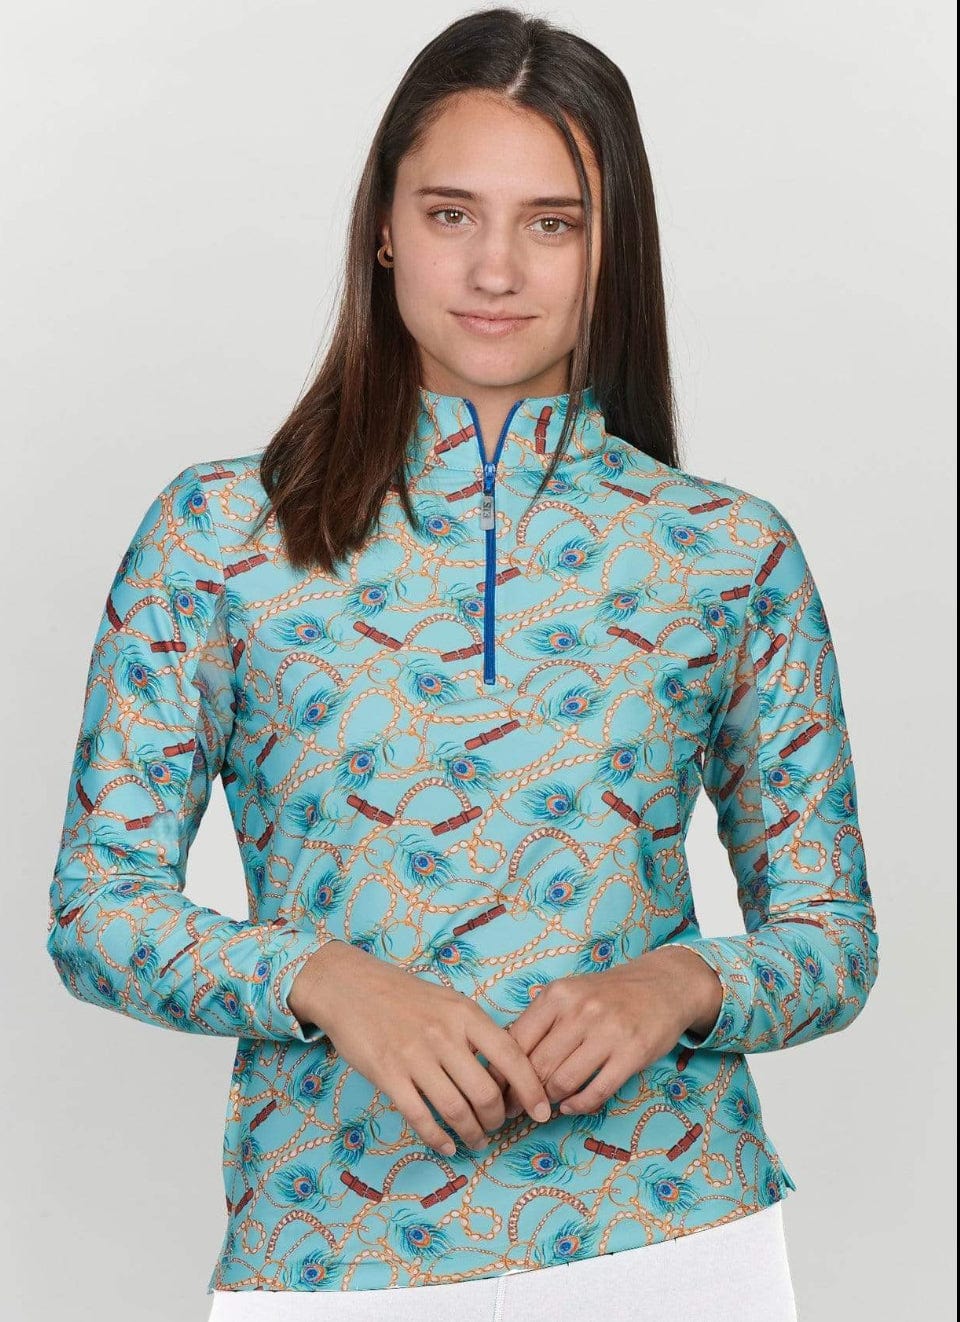 EIS Custom Team Shirts Peacock Pattern EIS- Sunshirts XS equestrian team apparel online tack store mobile tack store custom farm apparel custom show stable clothing equestrian lifestyle horse show clothing riding clothes horses equestrian tack store